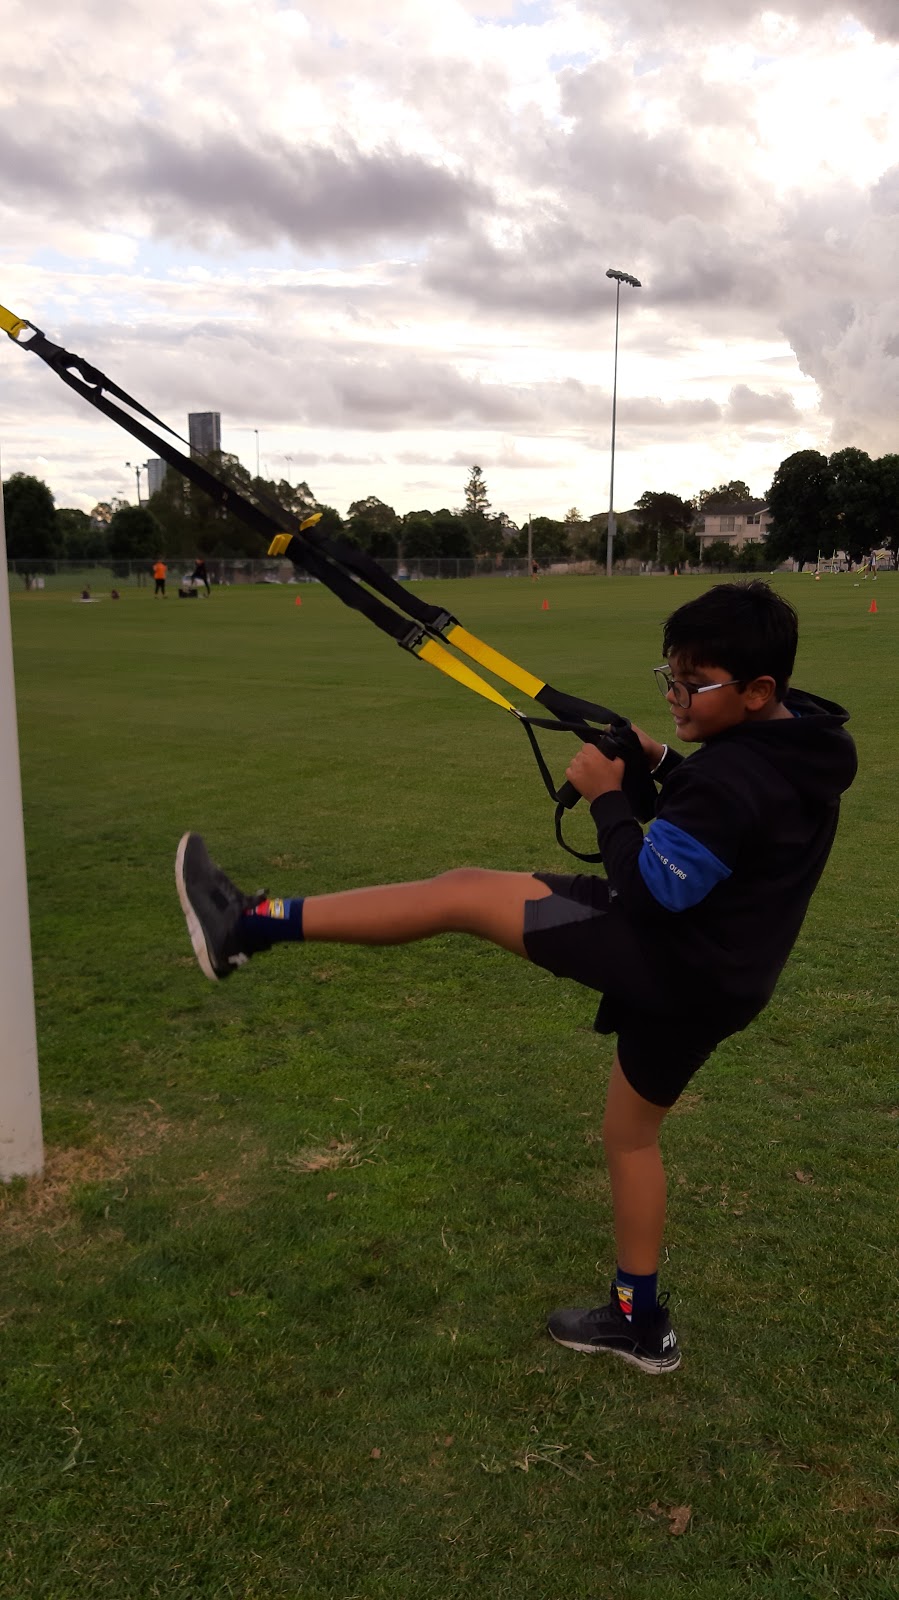 TRX Camp Fitness - Outdoor Fitness Sessions | health | Sherwin Park, Gladstone St, North Parramatta NSW 2151, Australia | 0423547112 OR +61 423 547 112